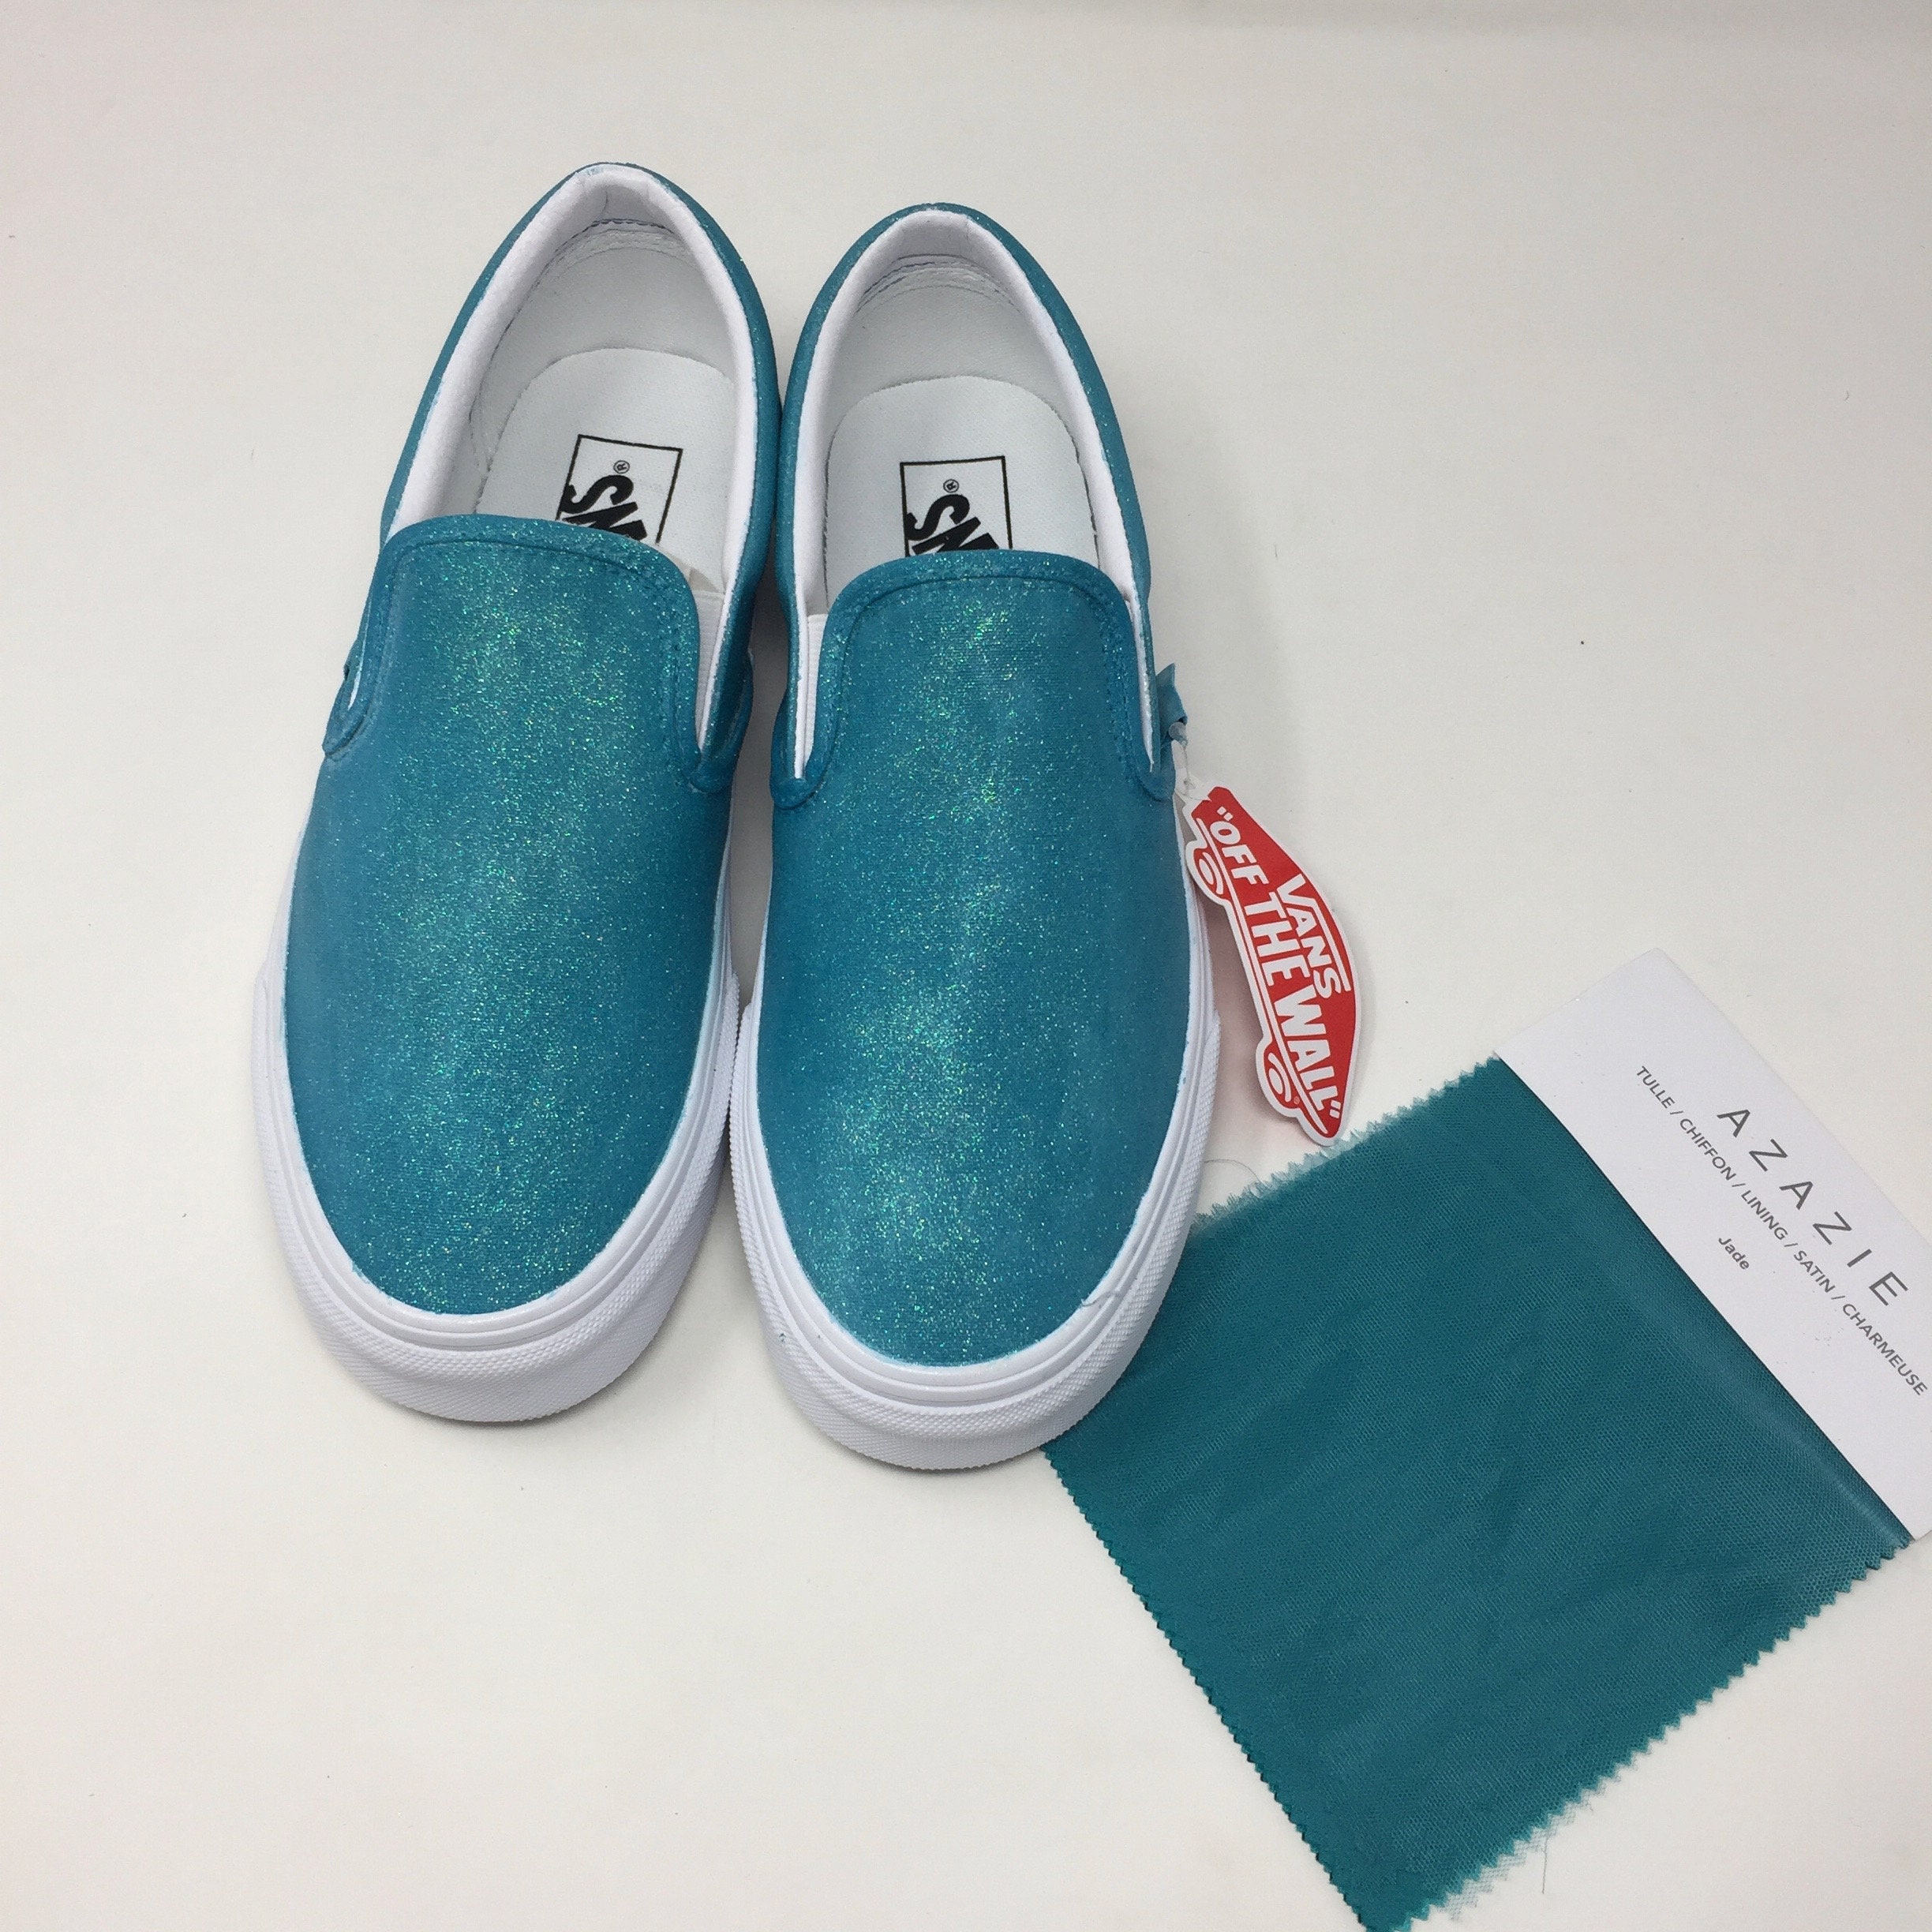 Teal Vans. Different brands. FREE Personalization teal toms | Etsy